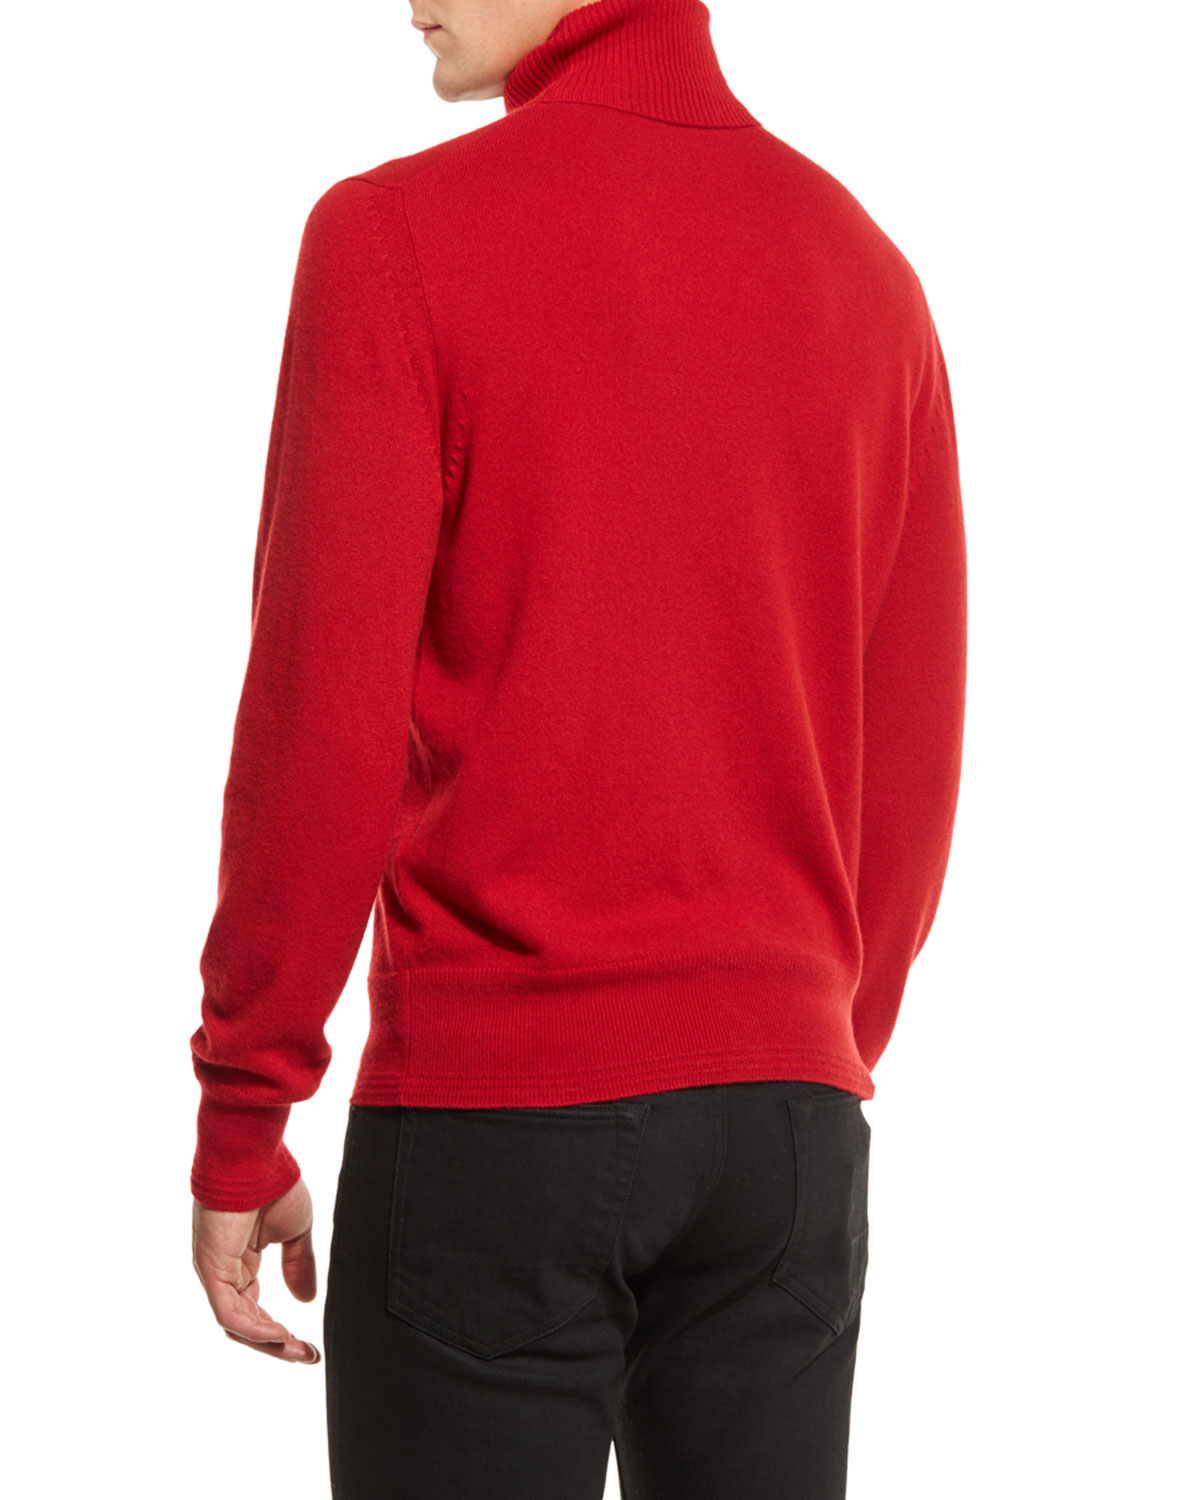 Lyst - Tom Ford Classic Flat-knit Cashmere Turtleneck Sweater in Red ...